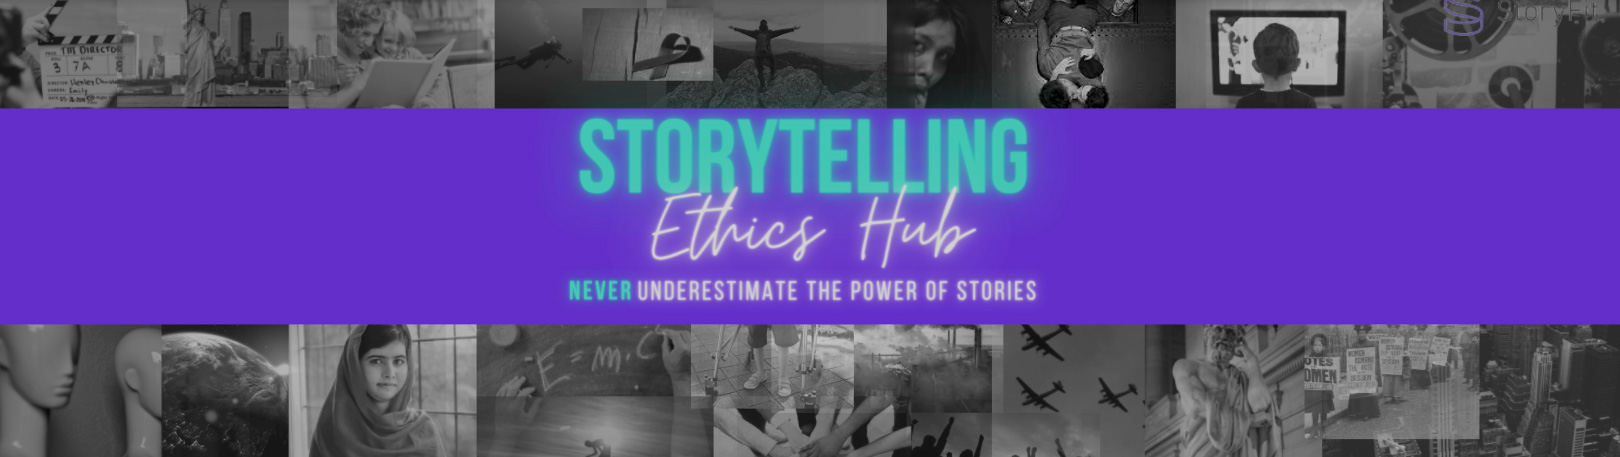 Cover image for Storytelling Ethics Hub with tagline reading, "Never underestimate the power of stories"